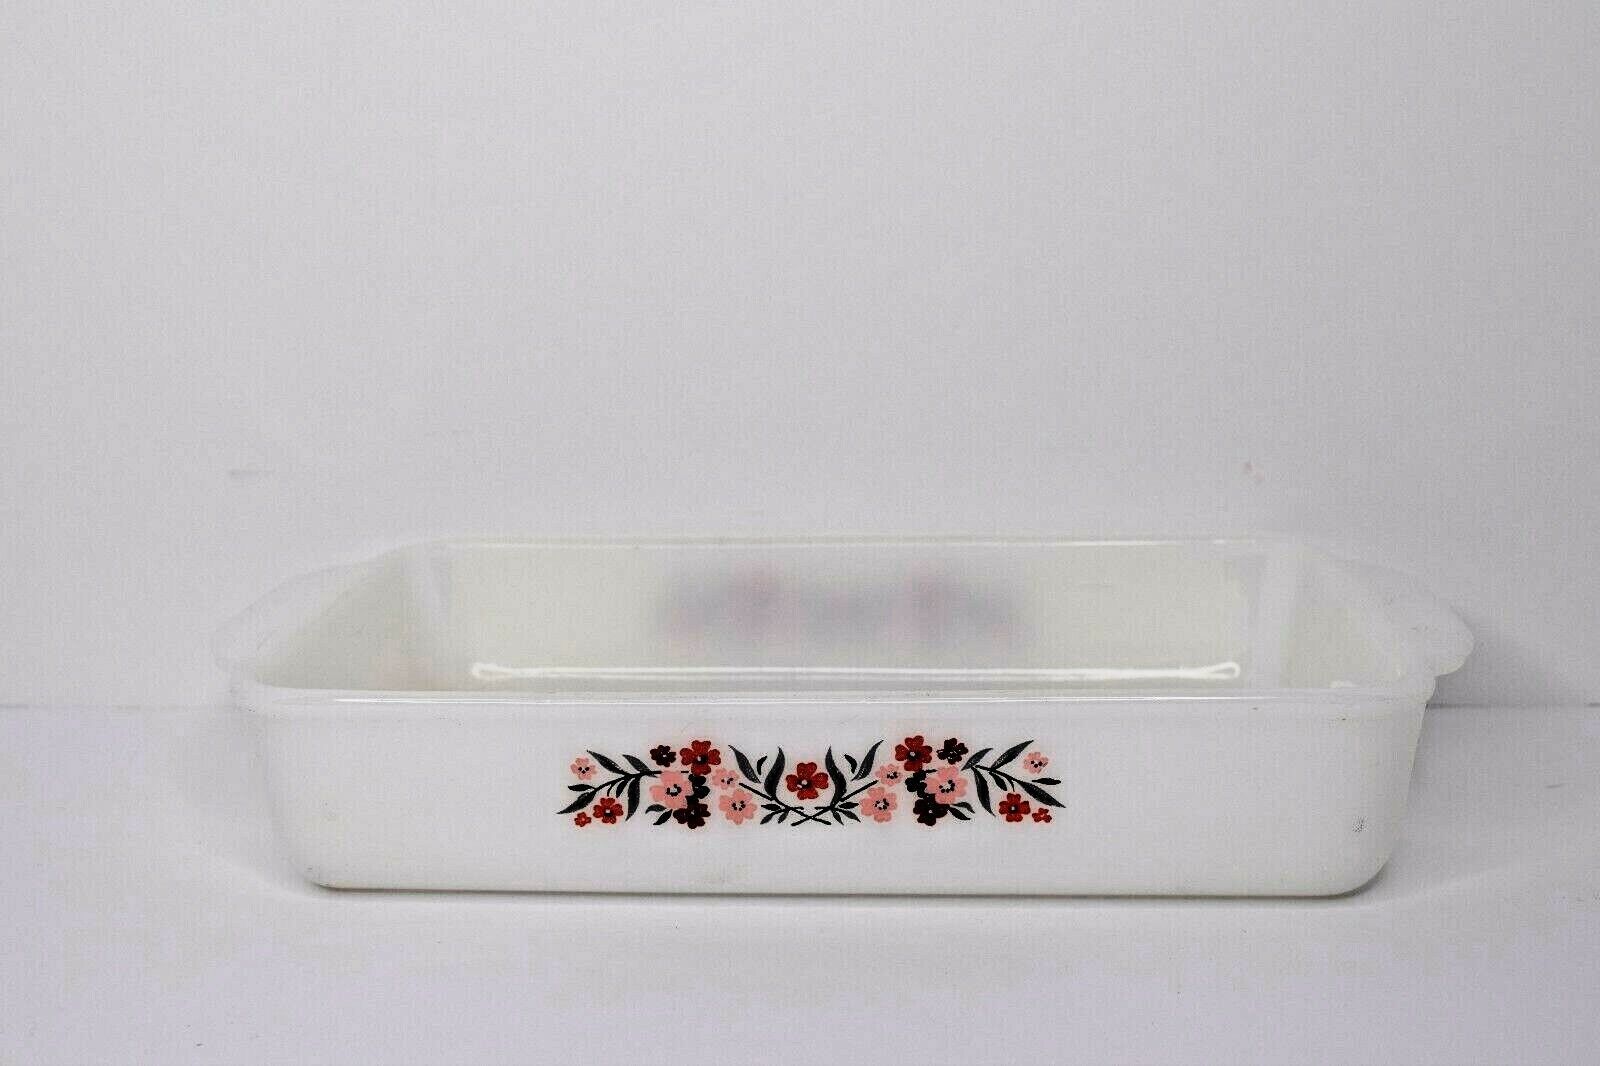 Primary image for Fire King Primrose 1 1/2 QT Baking Dish w/ Pink & Red Flowers 10" x 6 1/2"